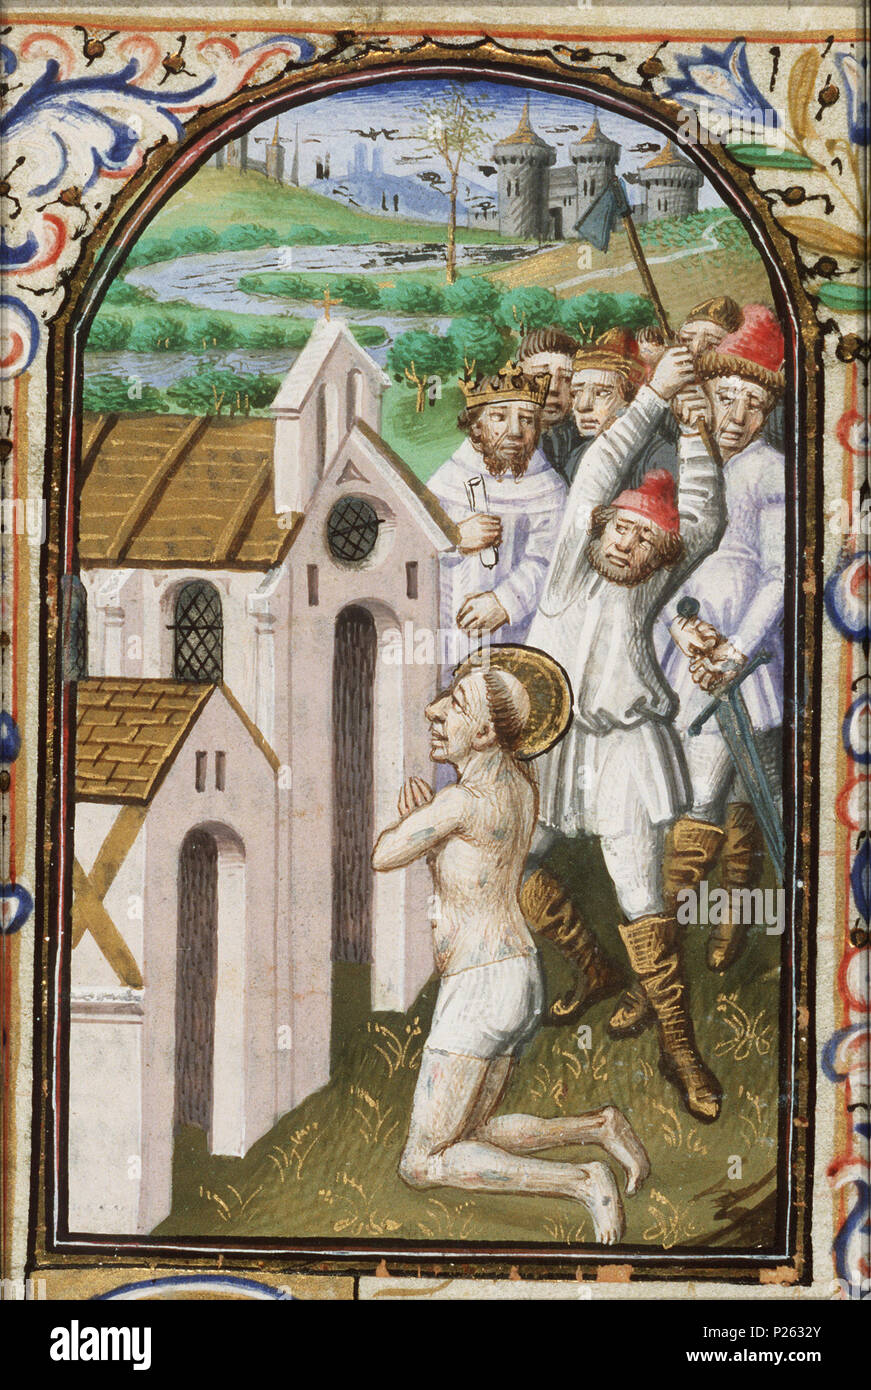 . Martyrdom of St. Eutropius of Saintes - miniature from folio 078vfrom the Book of Hours of Simon de Varie - KB 74 G37 .  Martyrdom of St. Eutropius of Saintes - miniature from folio 078v from the Book of Hours of Simon de Varie - KB 74 G37 Topics depicted in this miniature Male saints (eutropius of saintes) (OF SAINTES) 11H(EUTROPIUS OF SAINTES)) Violent death by beheading (31E23621) Hacking and thrusting weapons (hatchet) (45C13(HATCHET))   This miniature is part of folio 078v  . 1455 190 Martyrdom of St. Eutropius of Saintes - Book of hours Simon de Varie - KB 74 G37 - 078v min Stock Photo